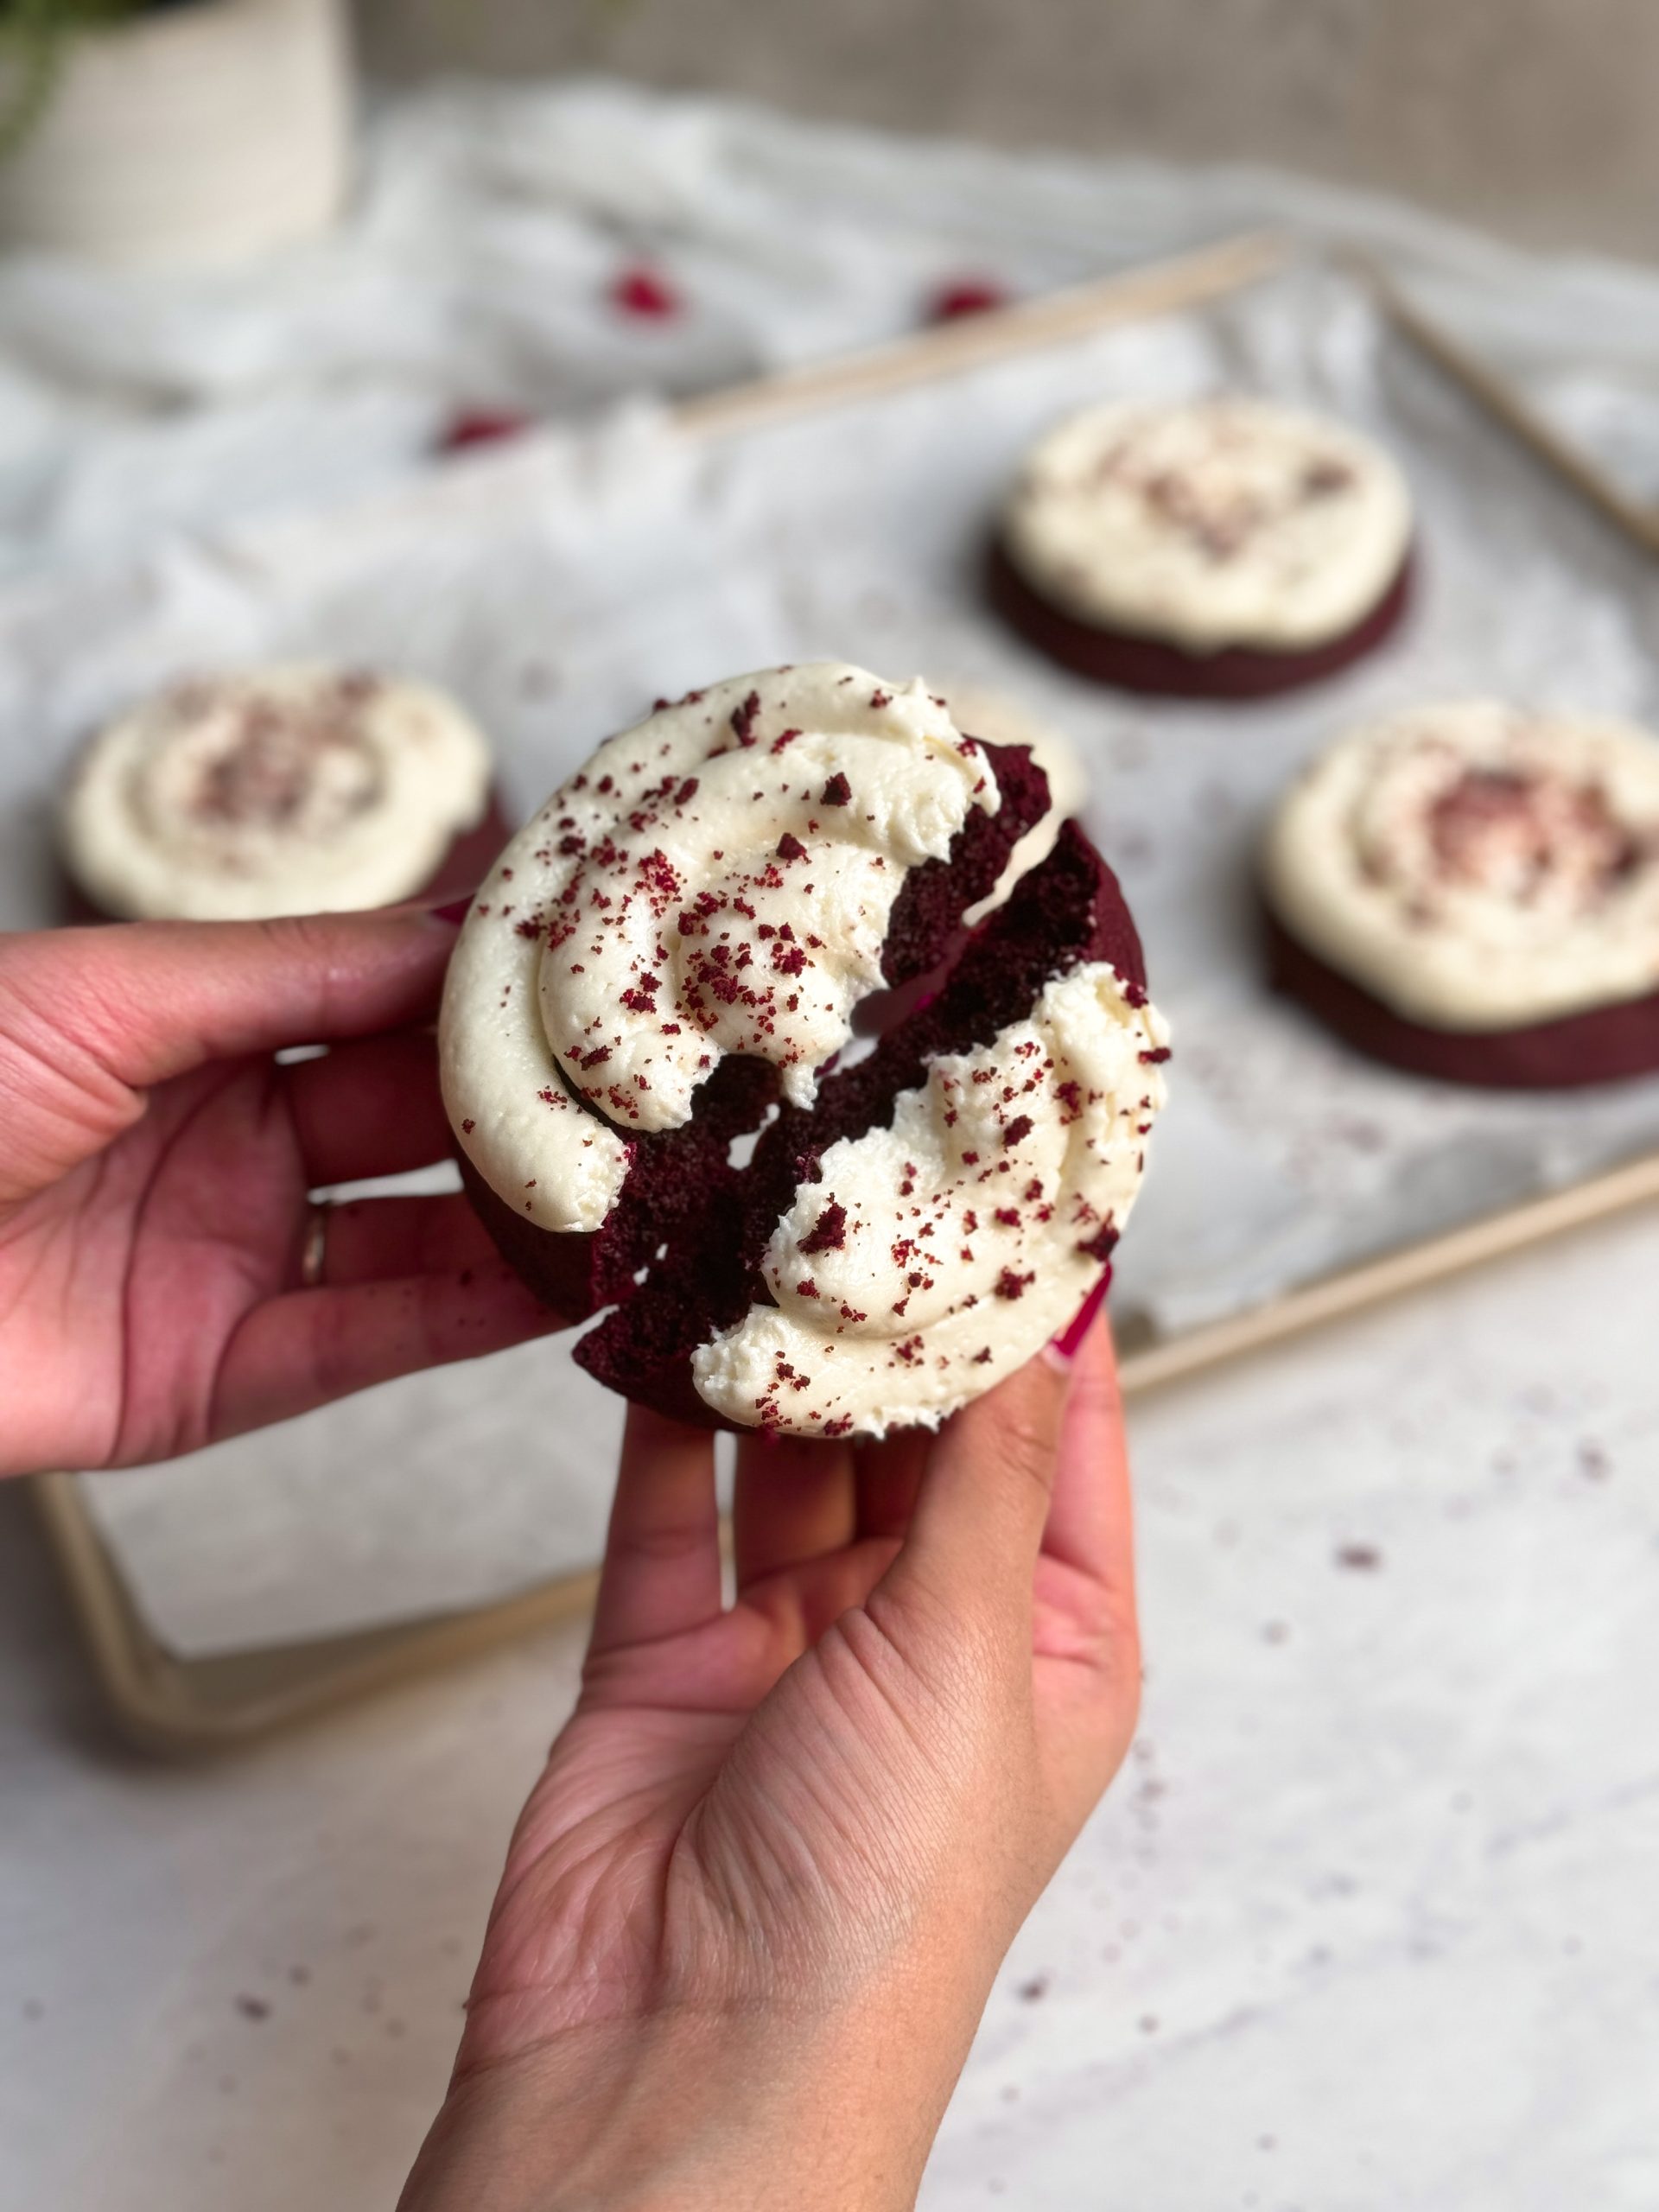 hand holding red velvet cookie with cream cheese frosting on top, cutting it into half to show the soft texture